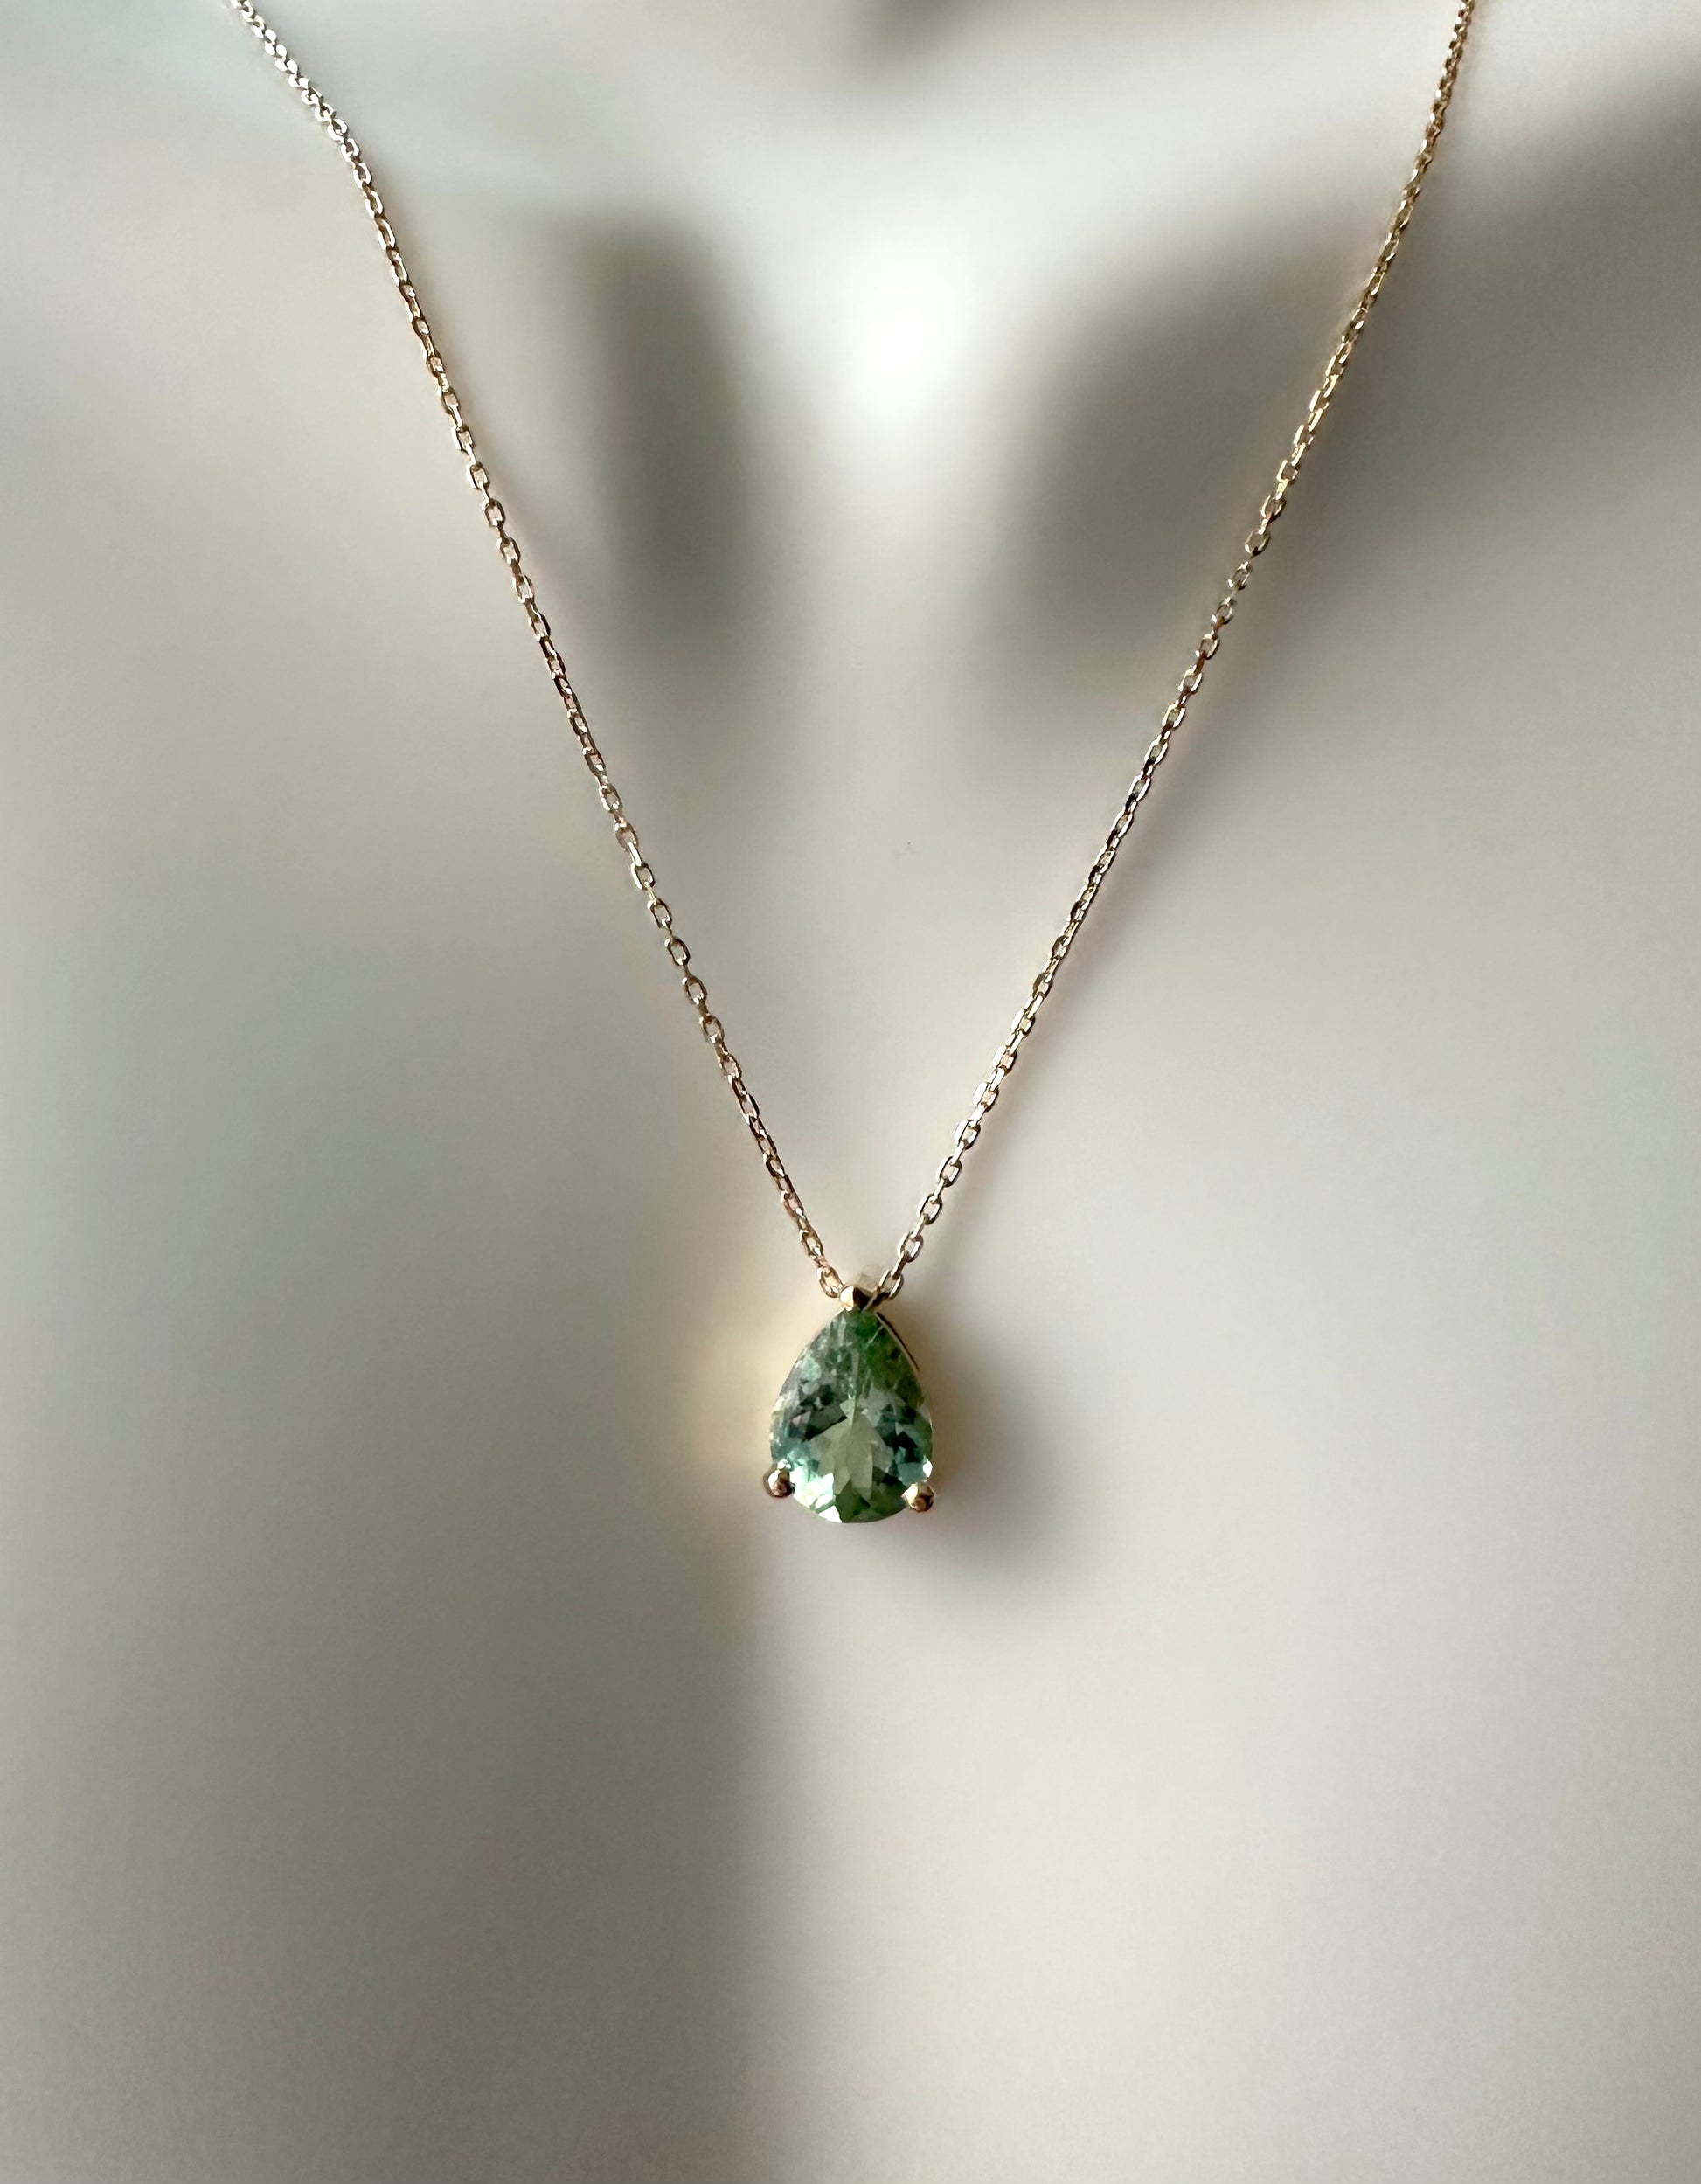 Green pear tourmaline necklace - Ella Creations Jewelry